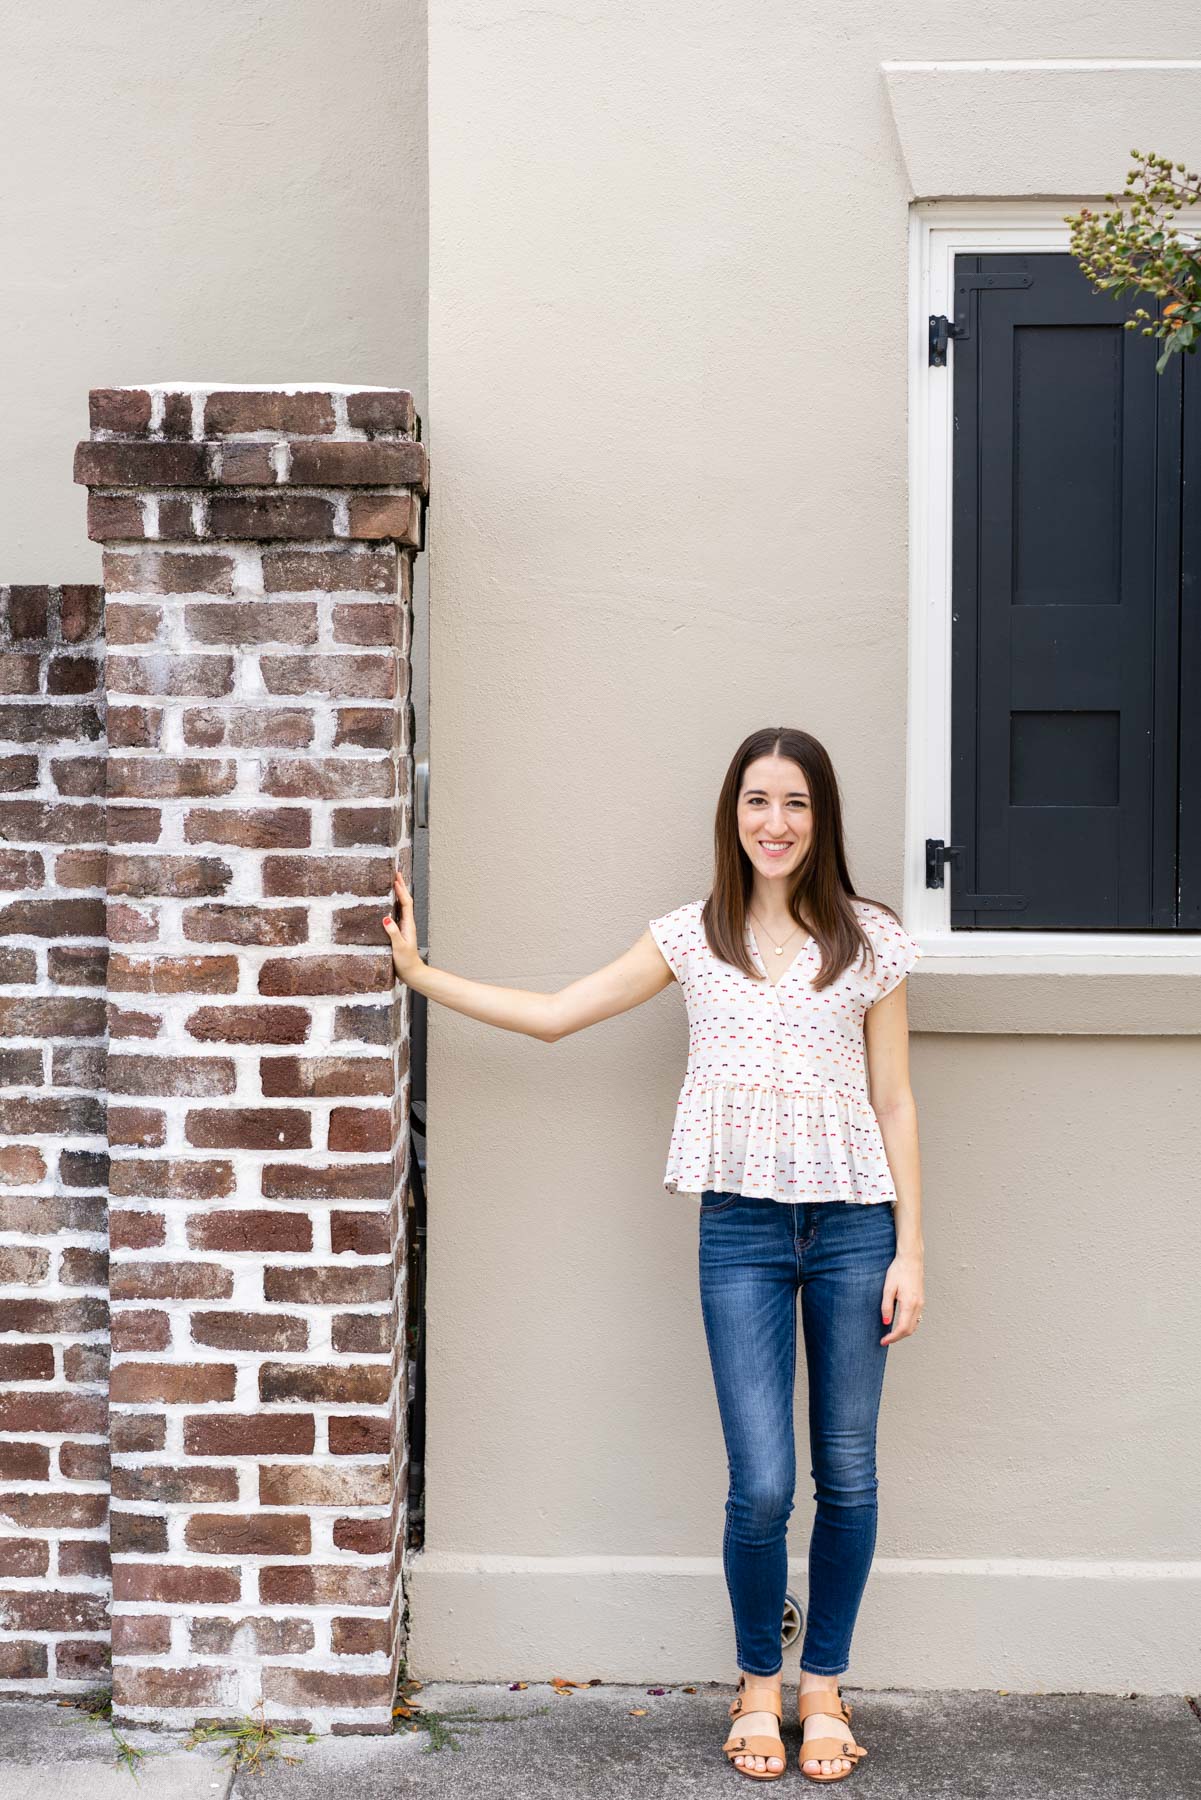 Woman in denim jeans and a white blouse standing near a brick wall demonstrating how not to pose for a photoshoot with her arm outstretched too far